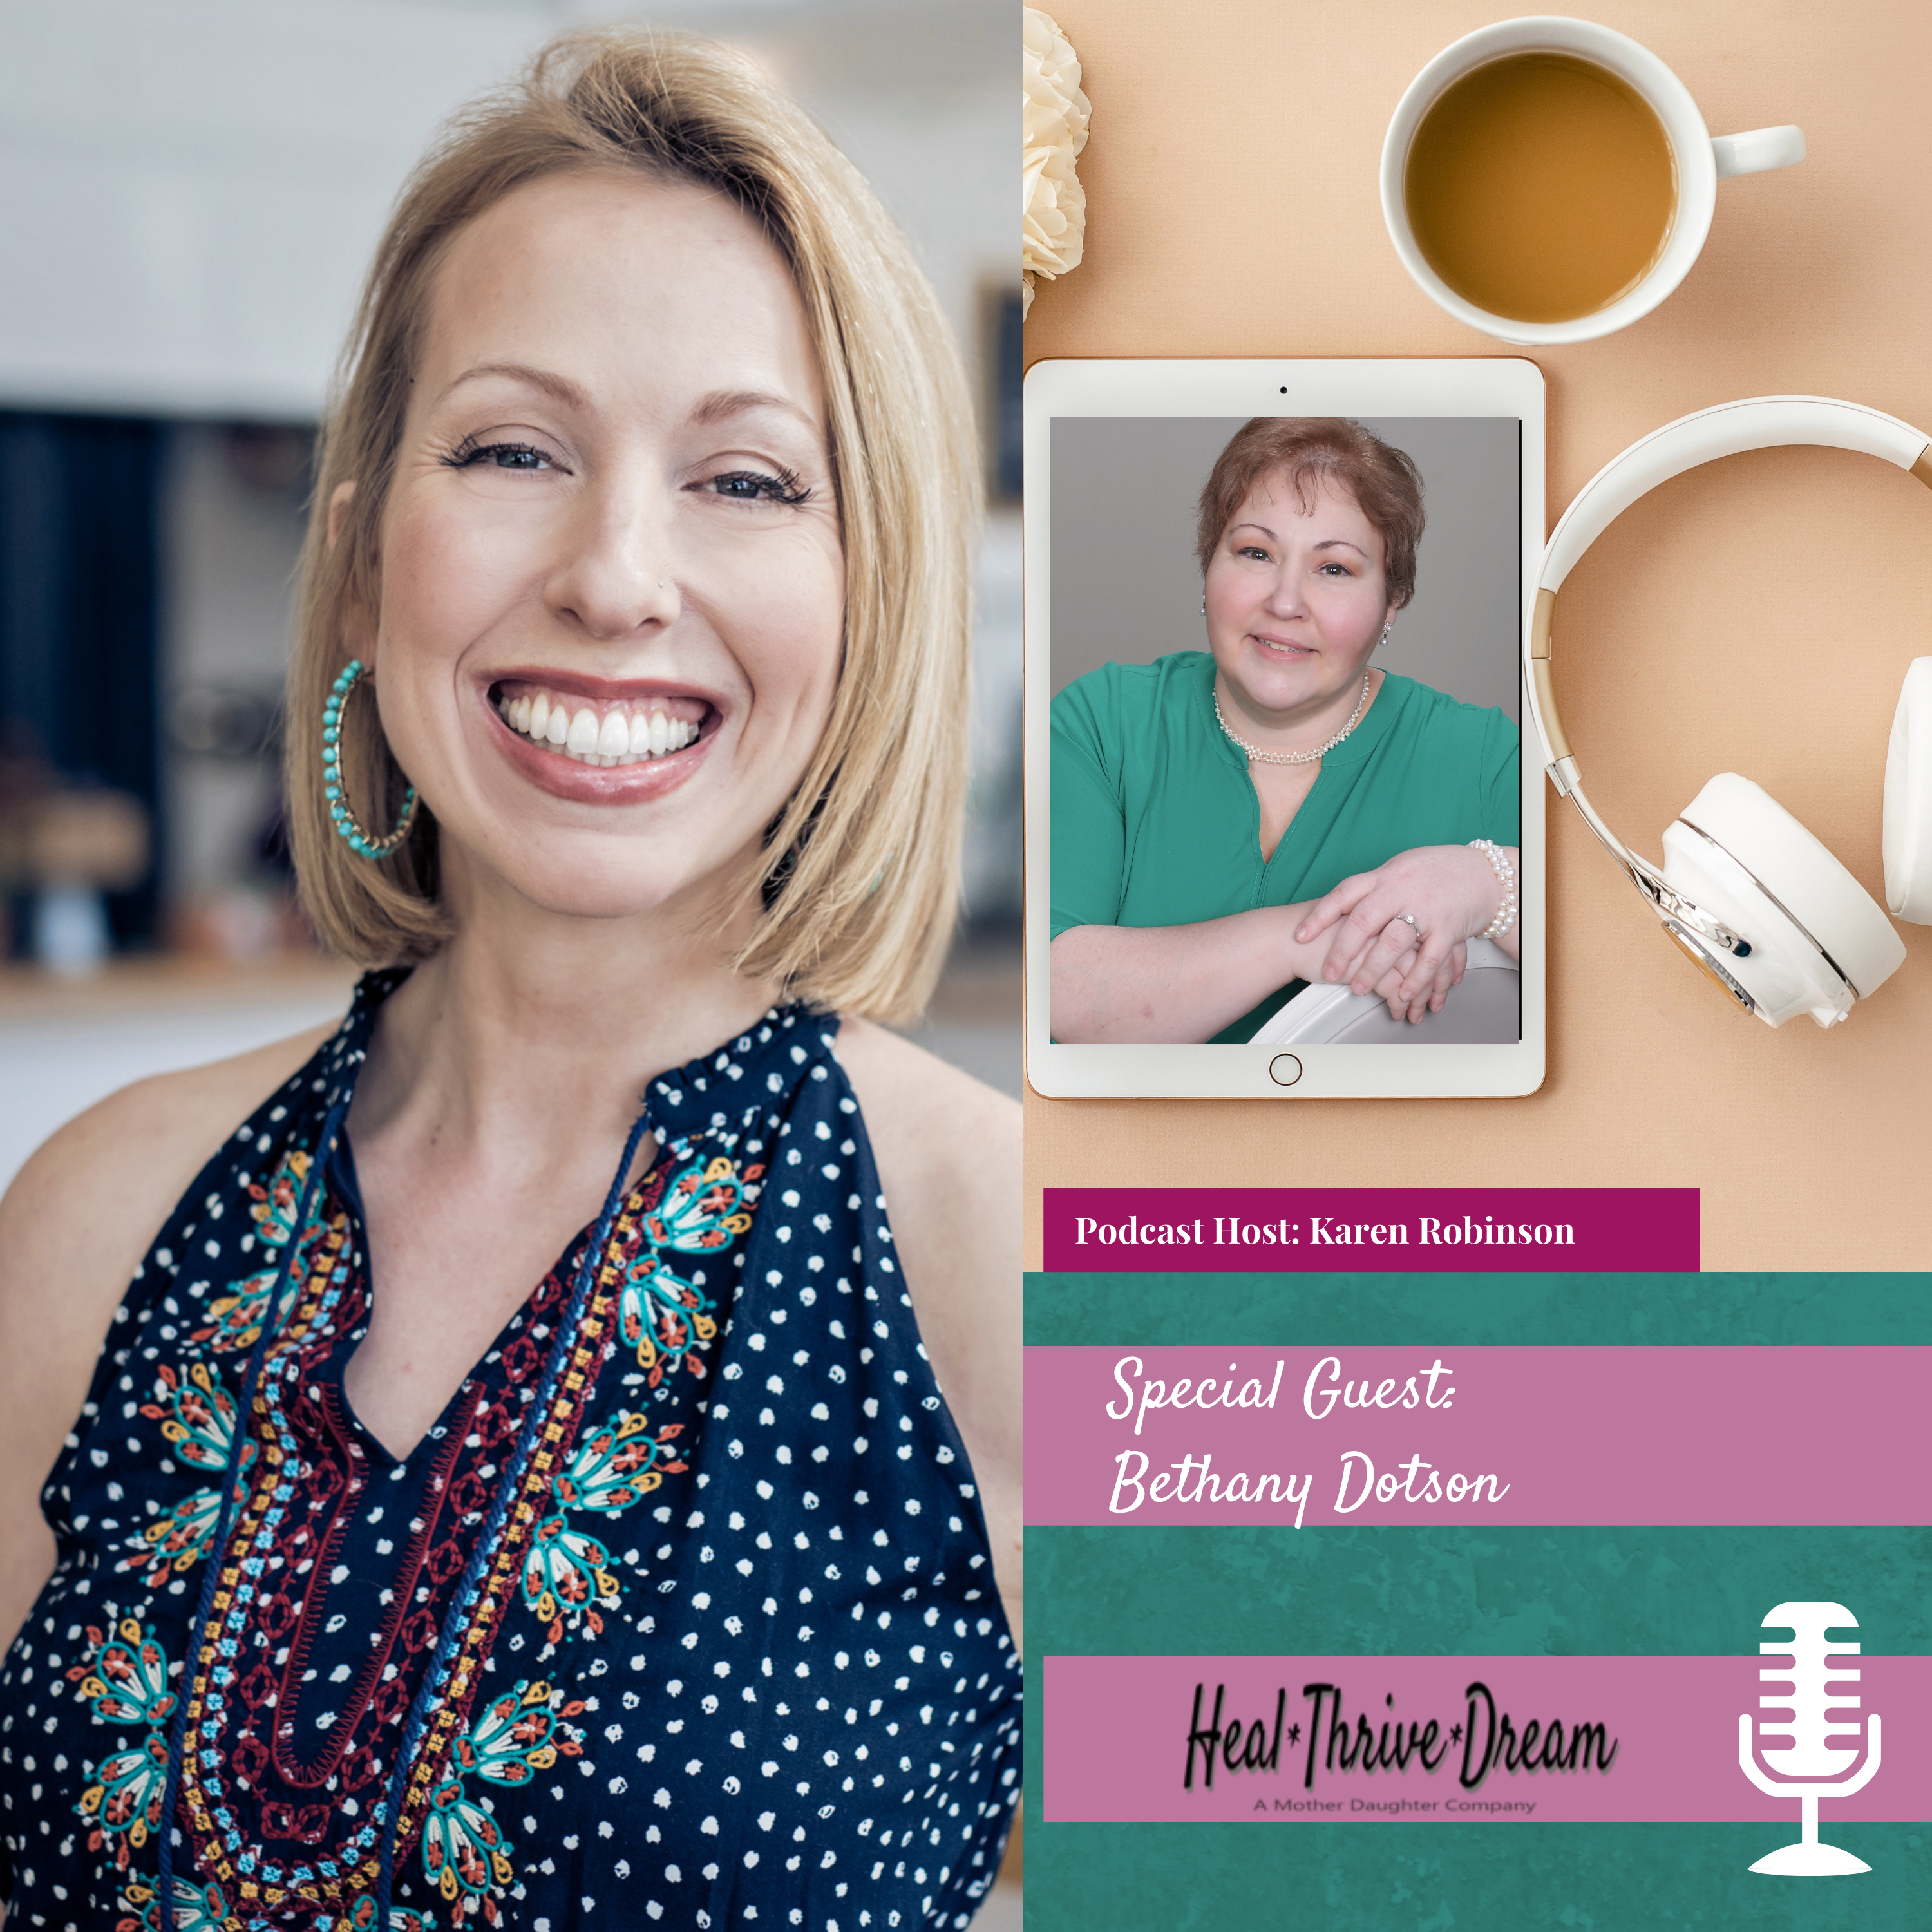 Heal Thrive Dream Guest: Bethany Dotson